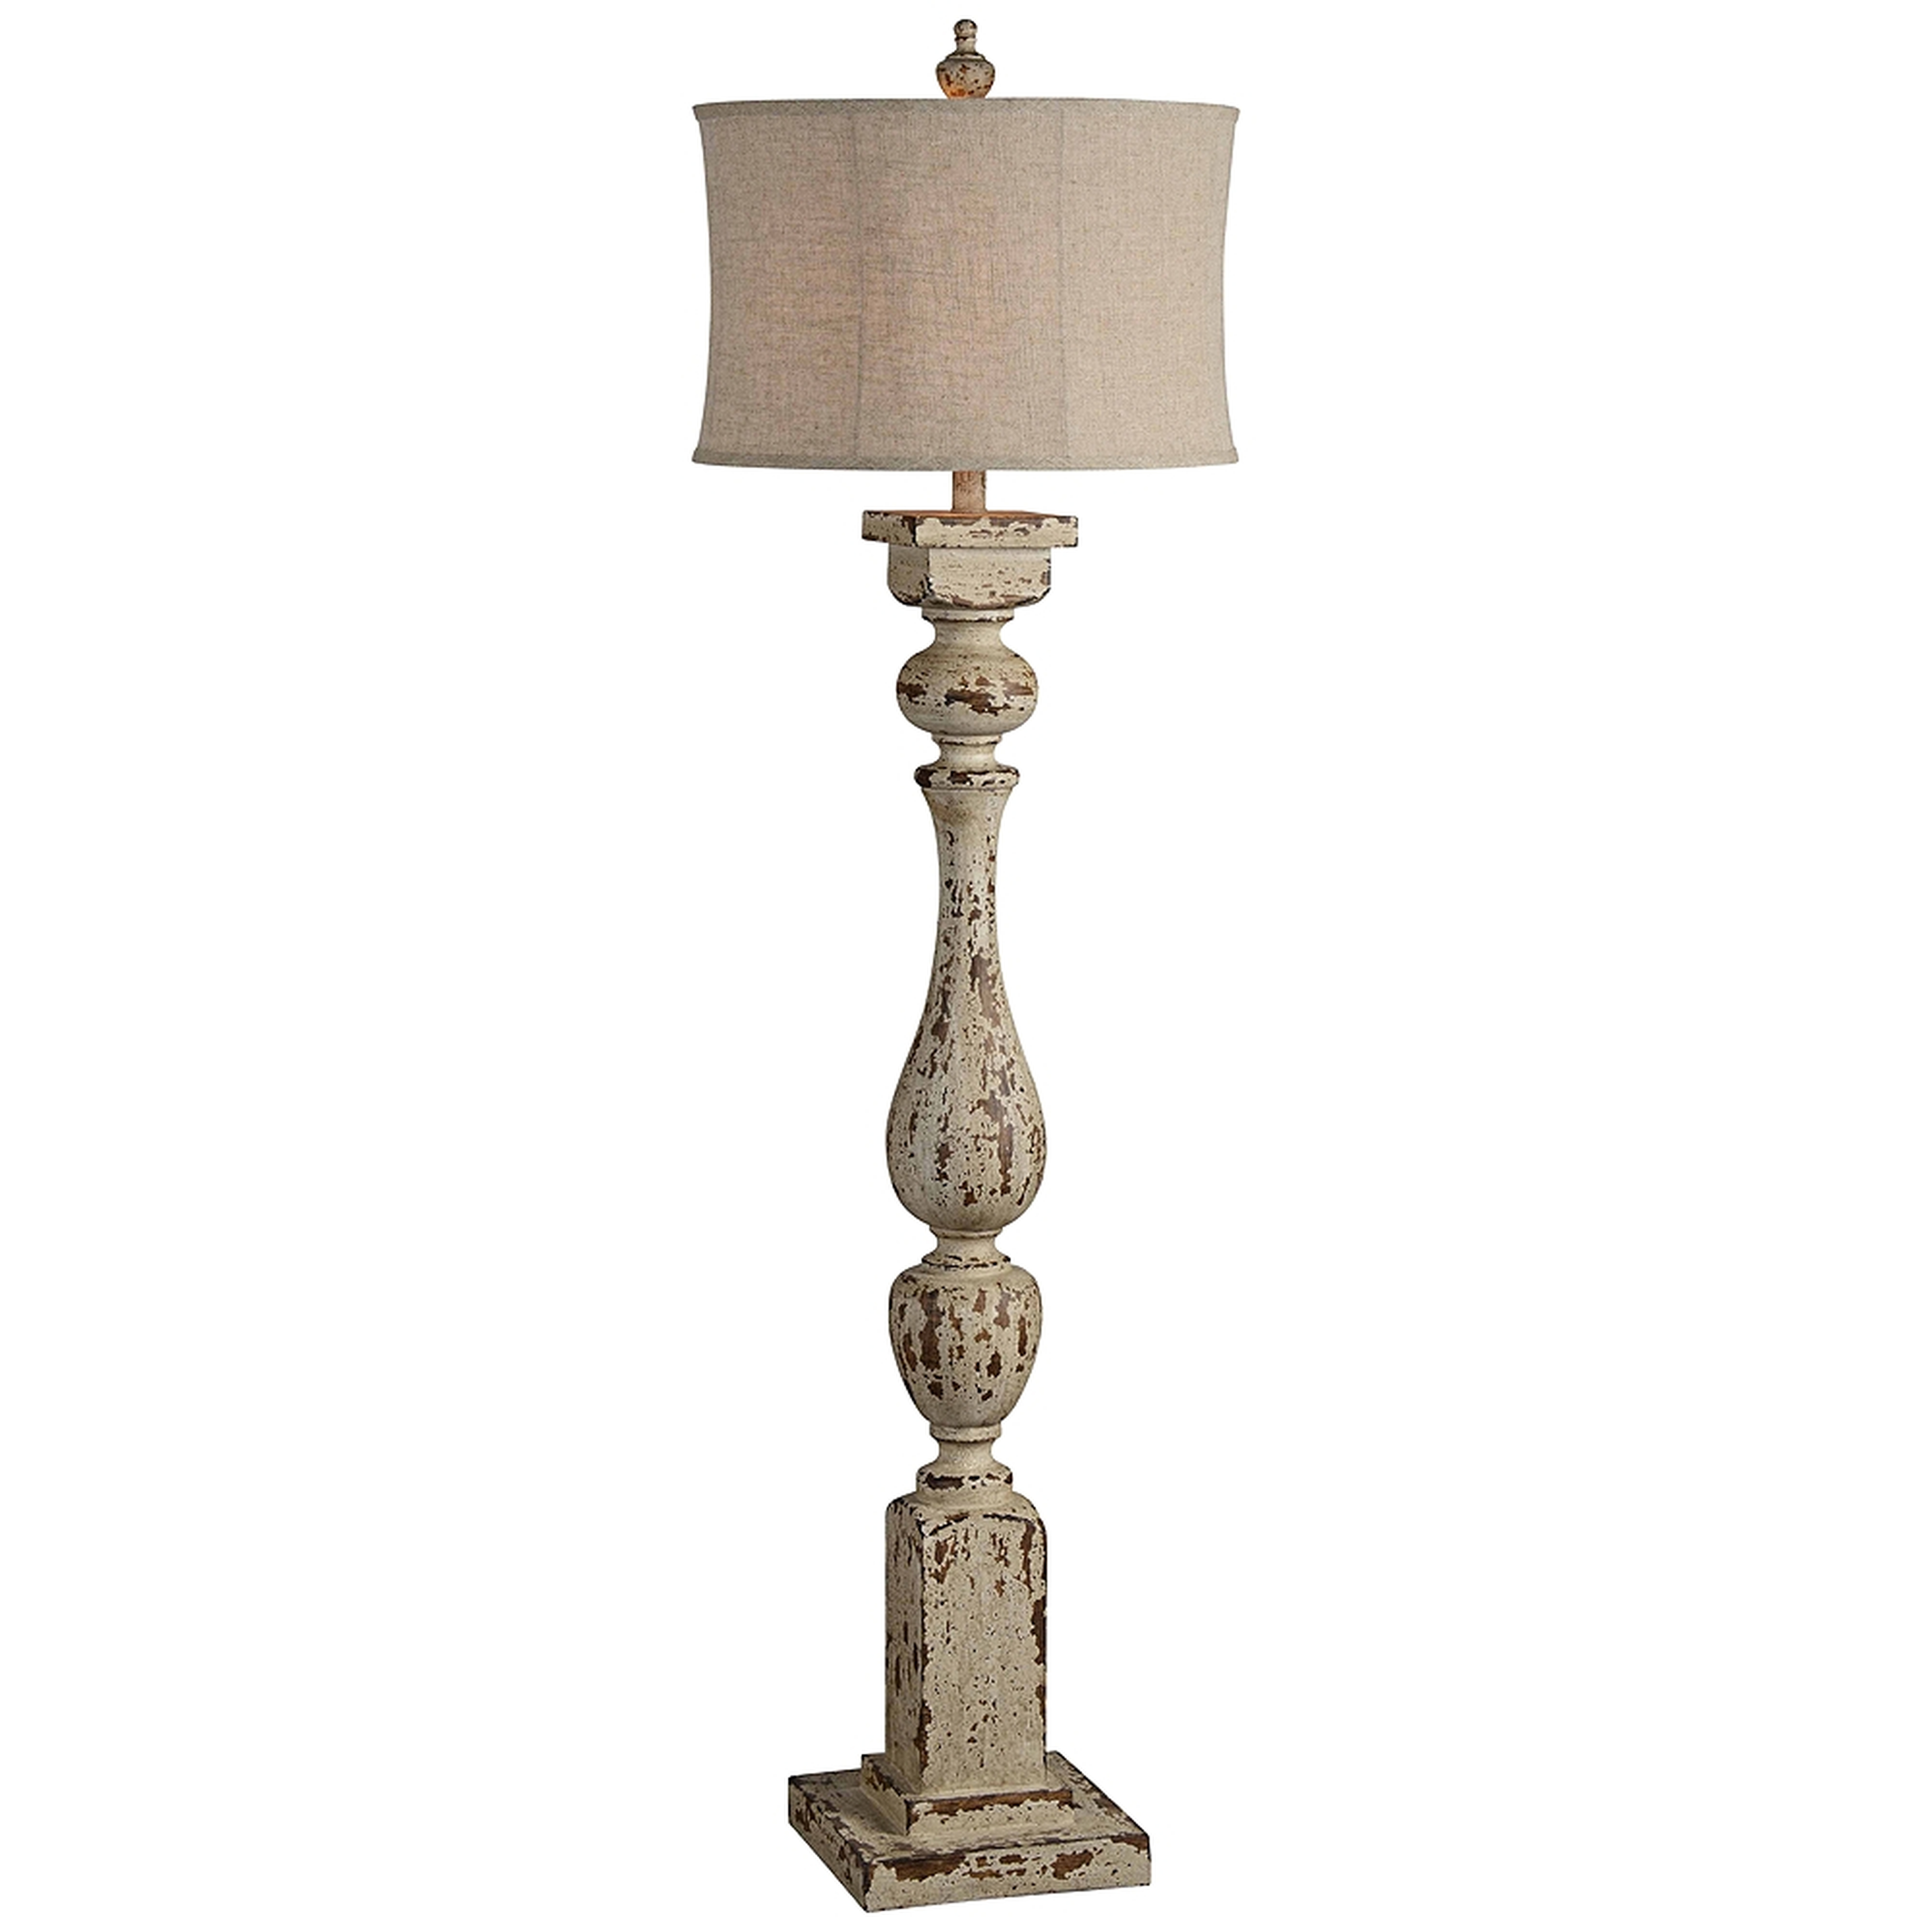 Forty West Anderson Rustic White Column Floor Lamp - Style # 69X89 - Lamps Plus